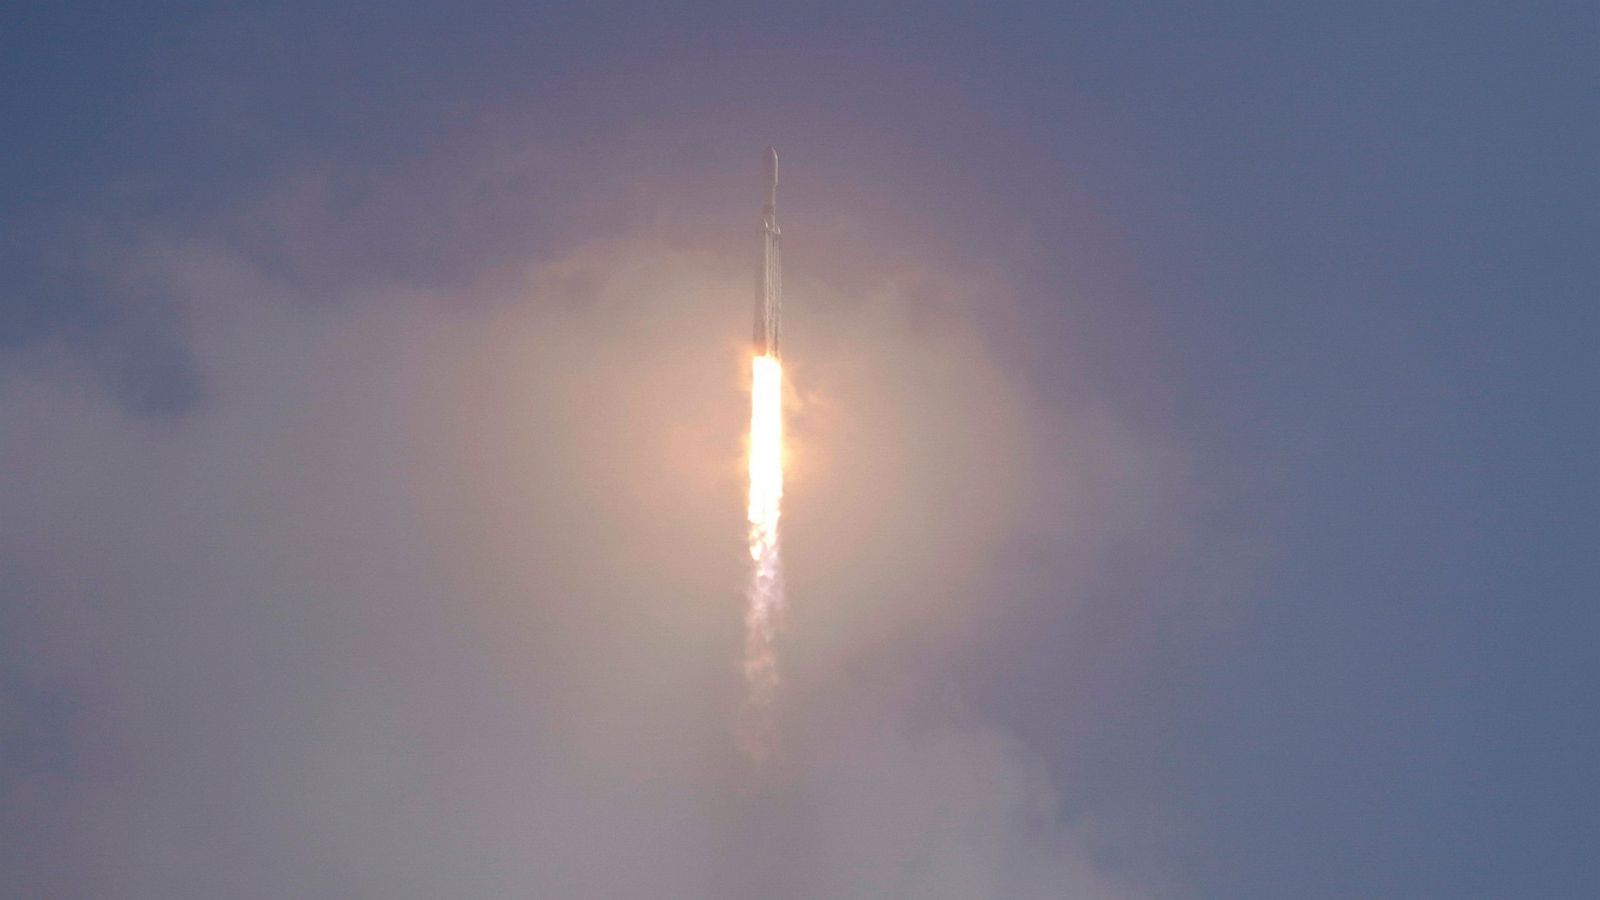 privacy hoog Oude tijden SpaceX nails booster landings after foggy military launch - ABC News